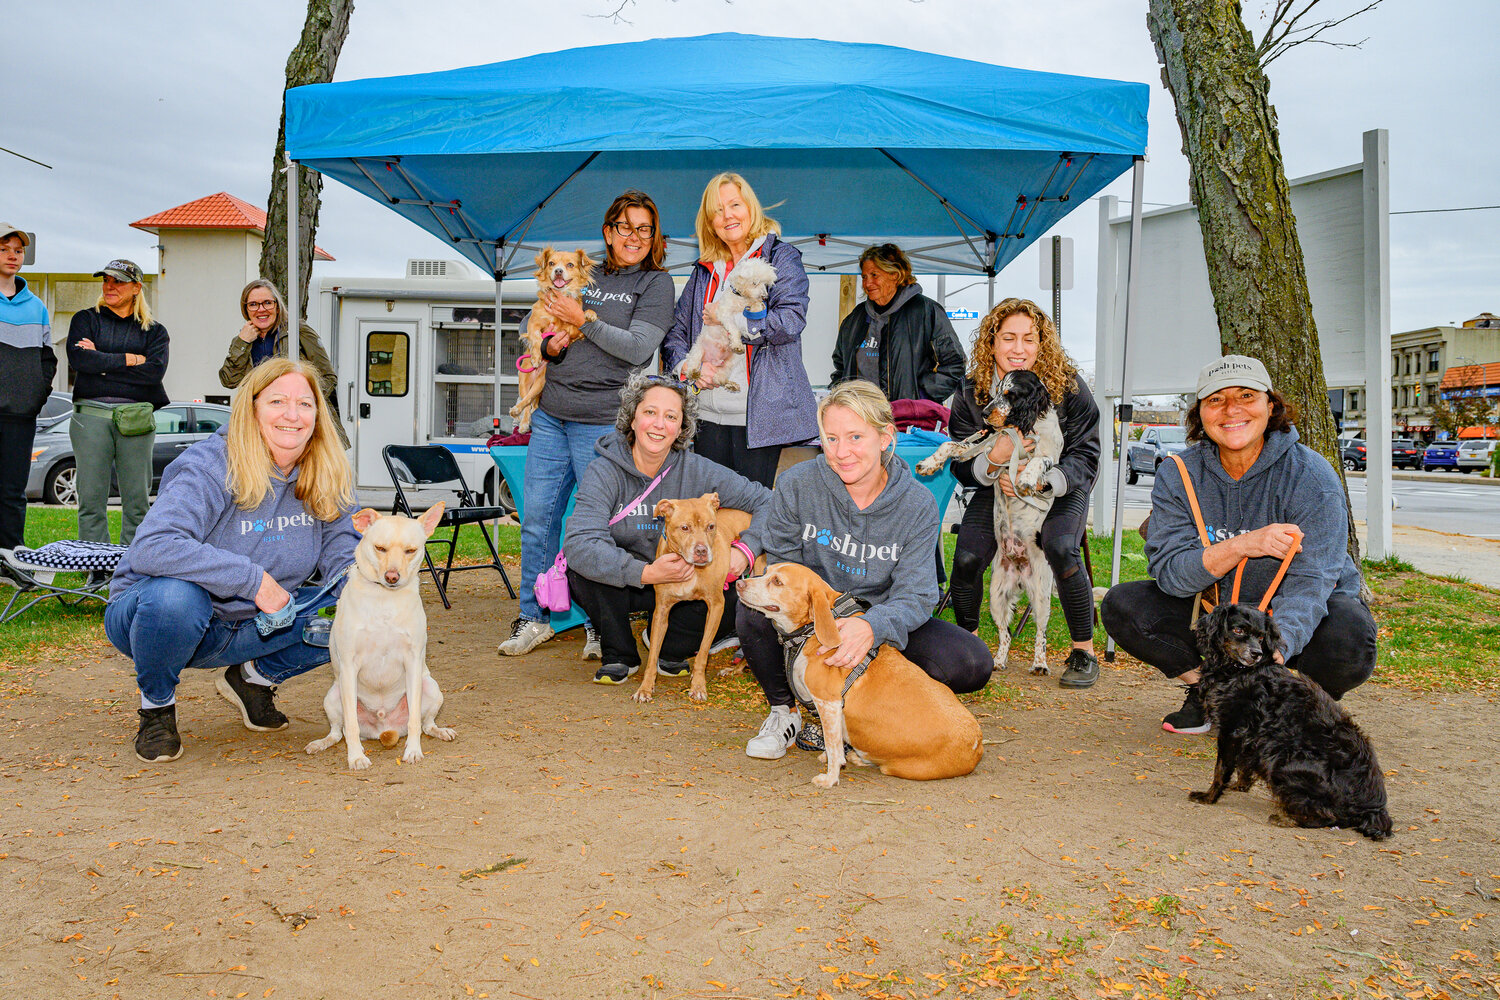 Posh Pets, of Long Beach, held it’s first-ever Posh-A-Thon in Kennedy Plaza on Oct. 29.